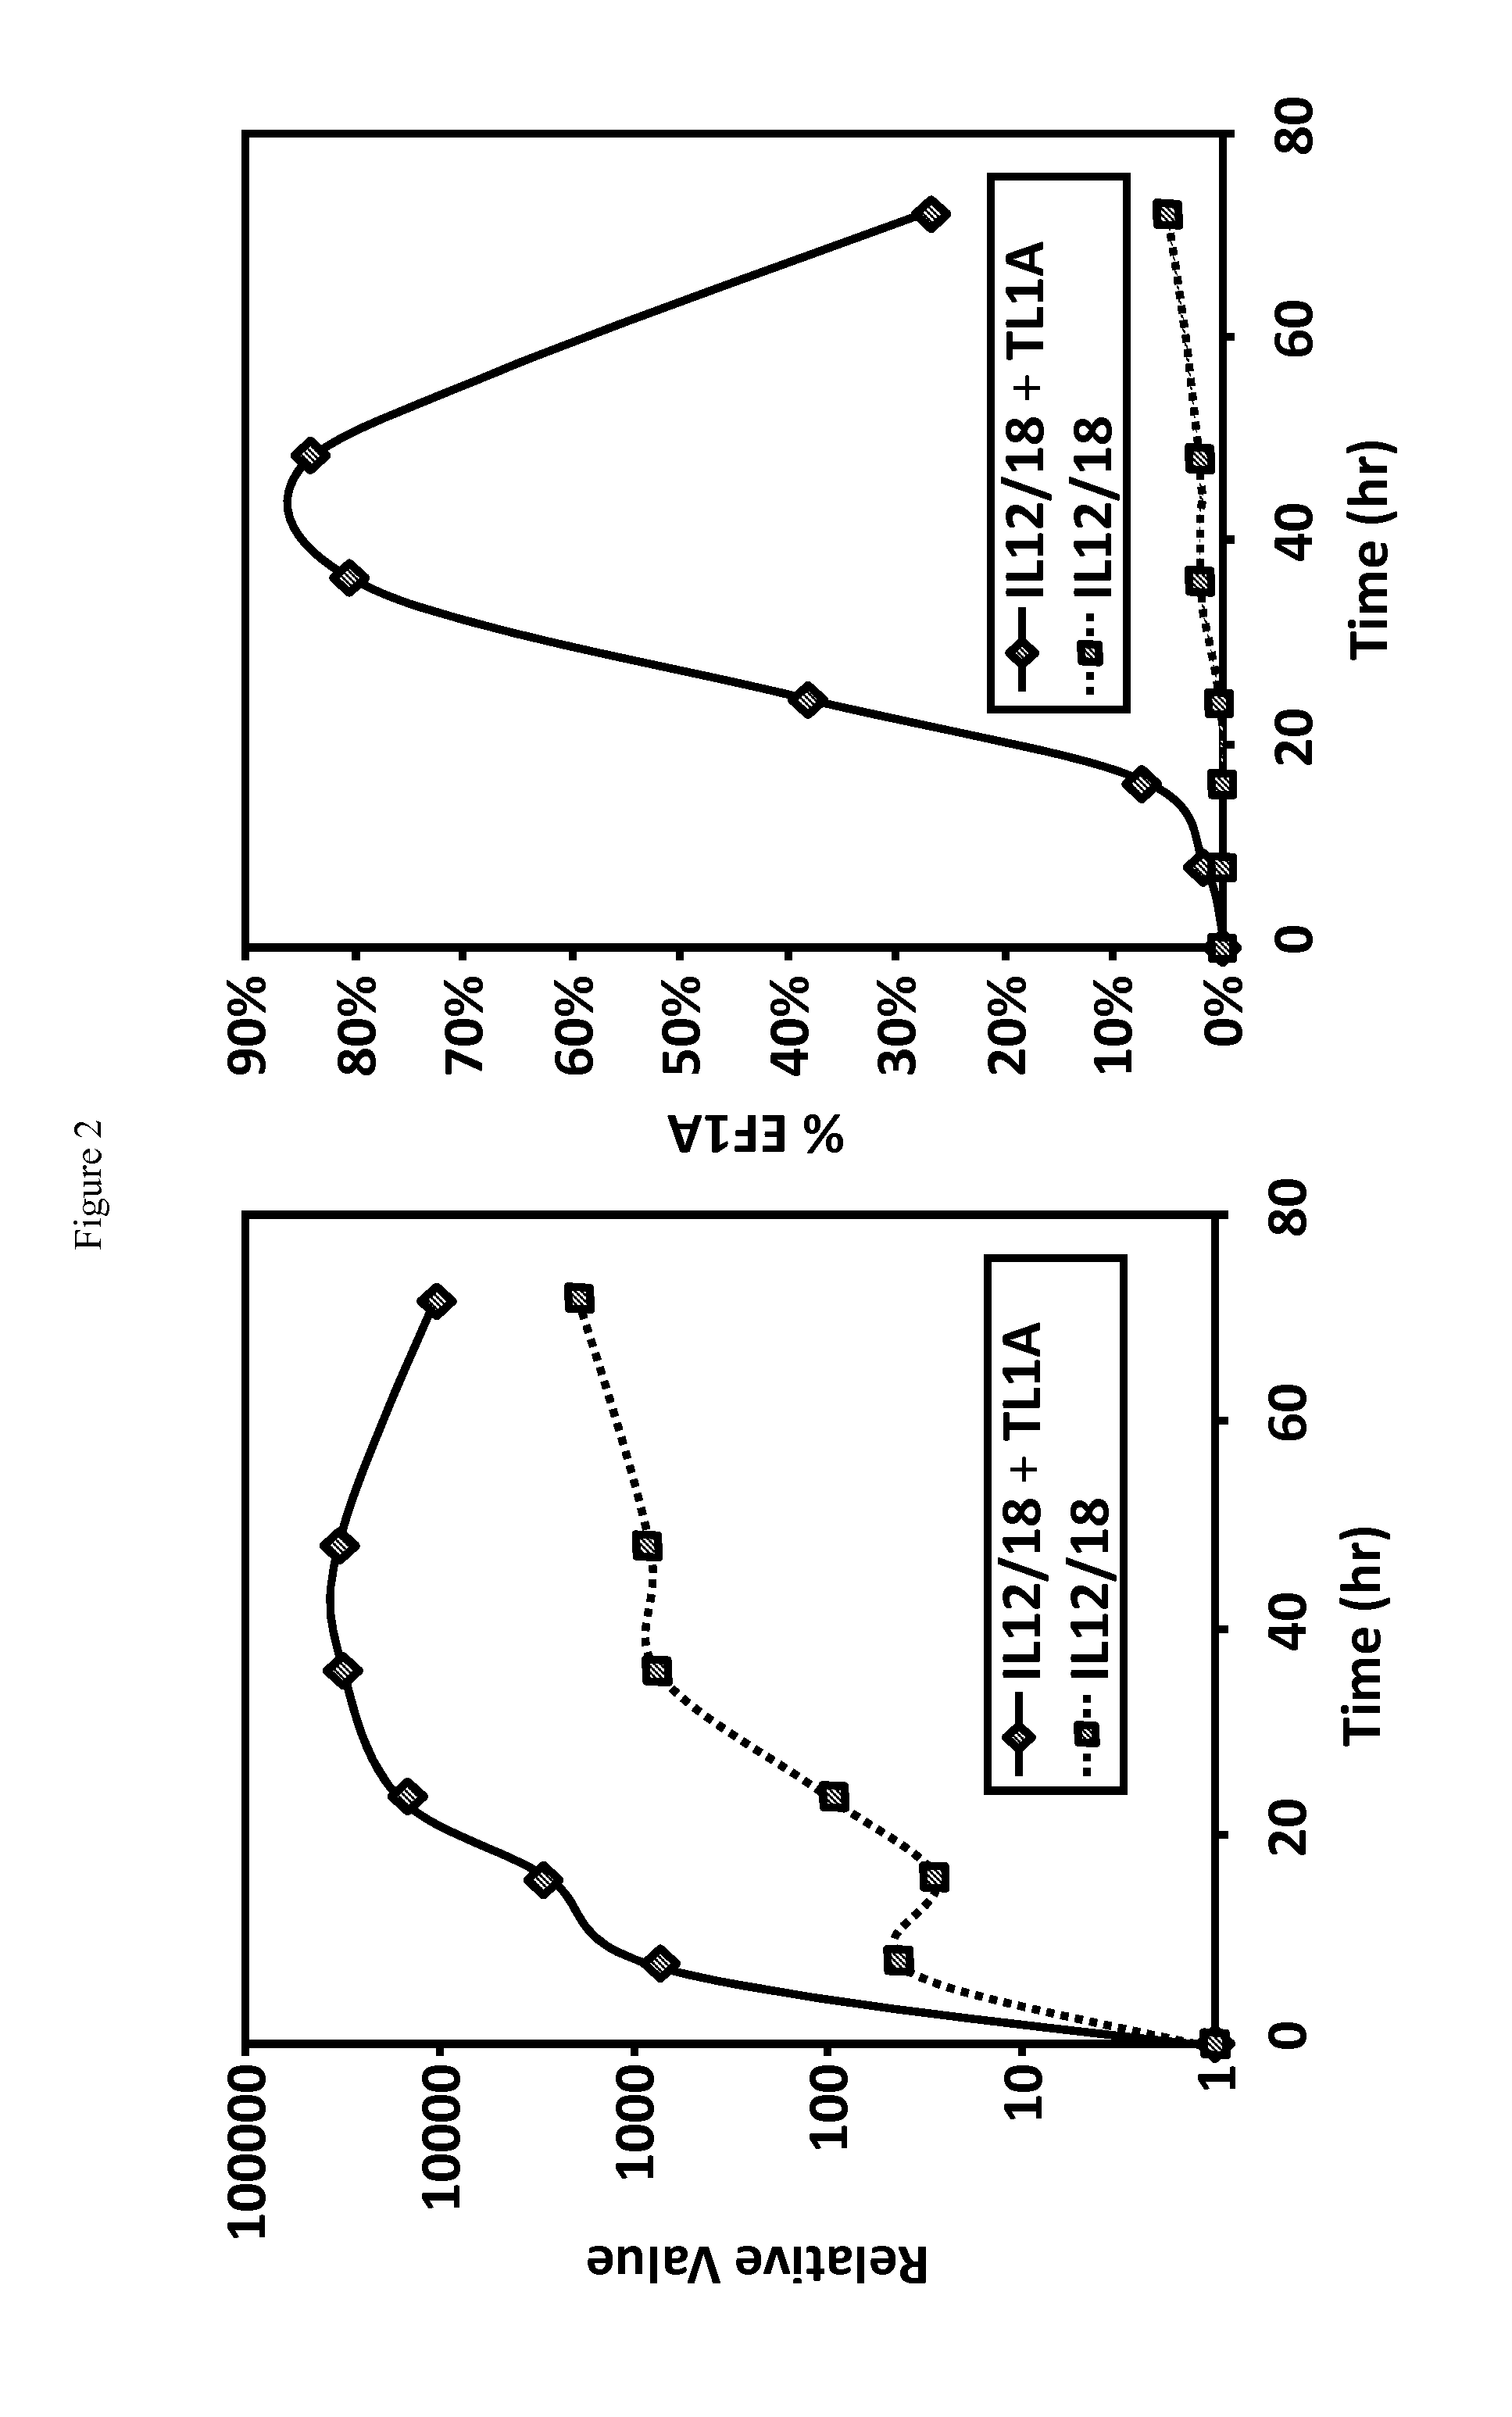 Systems, devices and methods for Anti-tl1a therapy